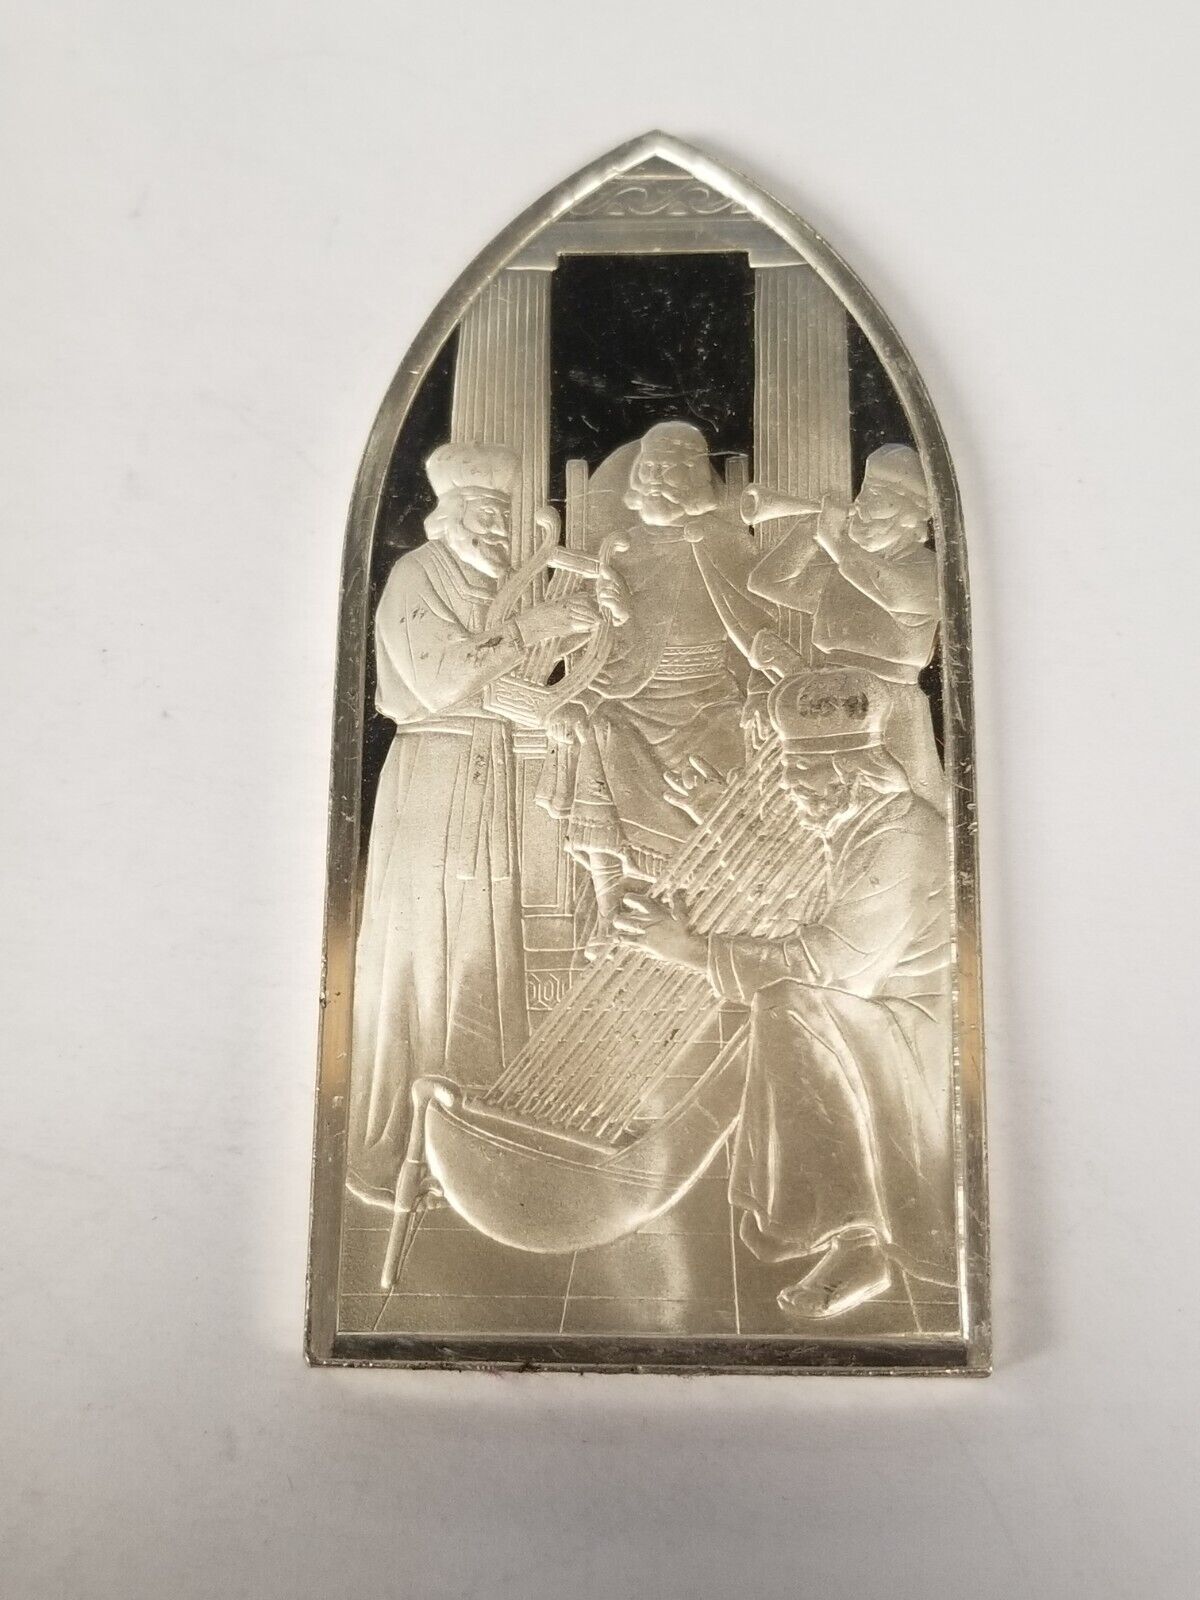 1 OZ.STERLING (CHRONICLES) DAVID INSTITUTES TEMPLE MUSIC SILVER BAR INGOT